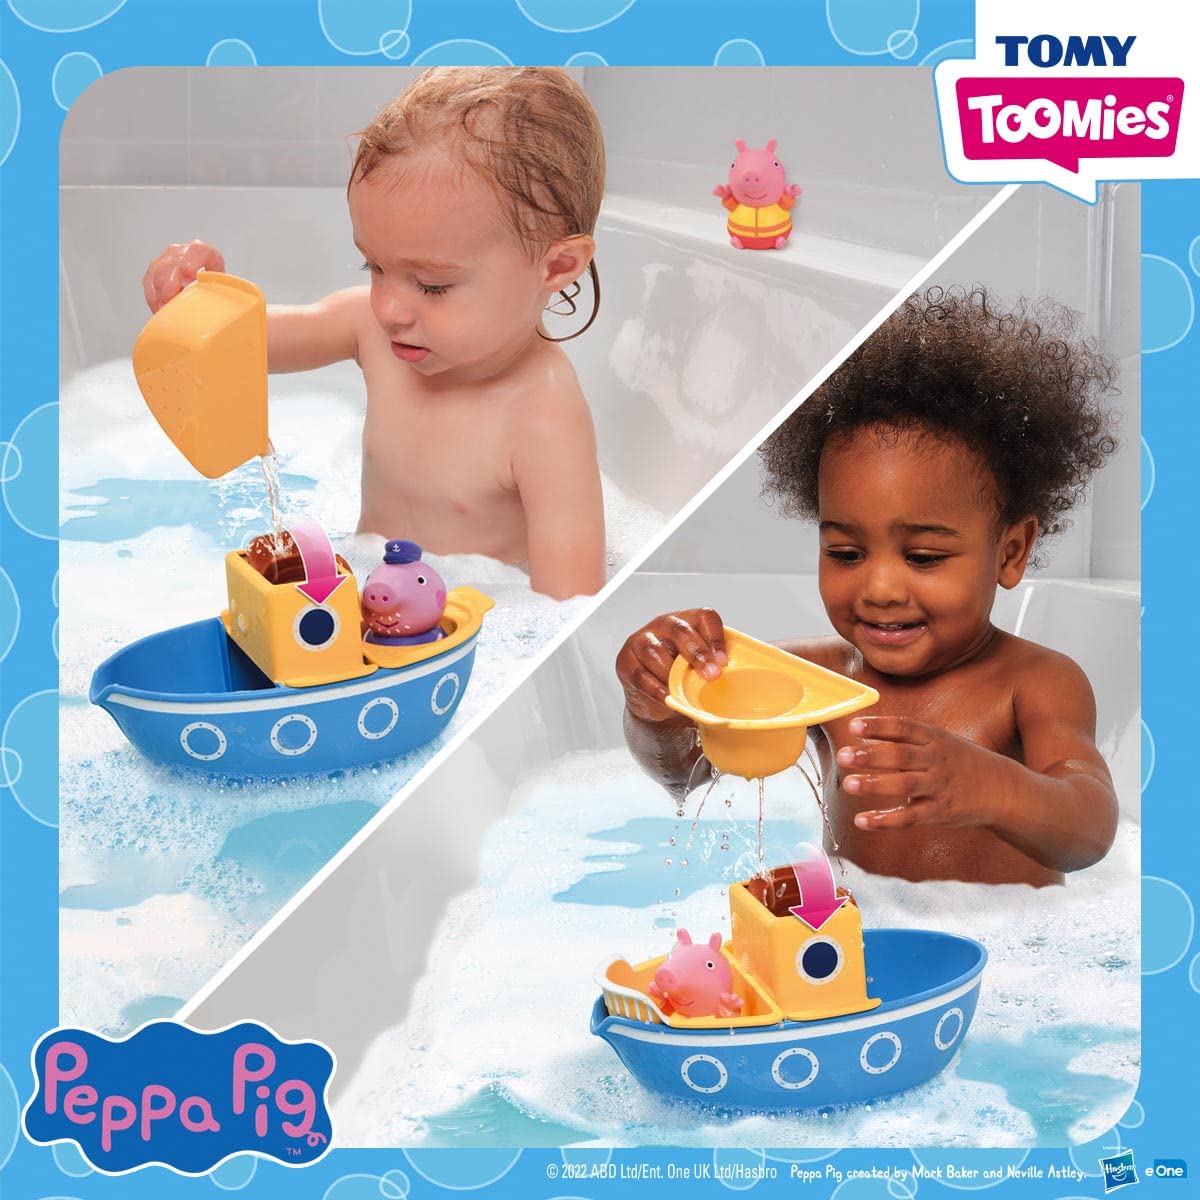 Tomy E73414 Grandpa Pig’s Splash & Pour Boat from Toomies – 4-in-1 Bath Time Peppa Pig Toy with Removable Water Sprinklers and Spinning Paddle Wheelhouse